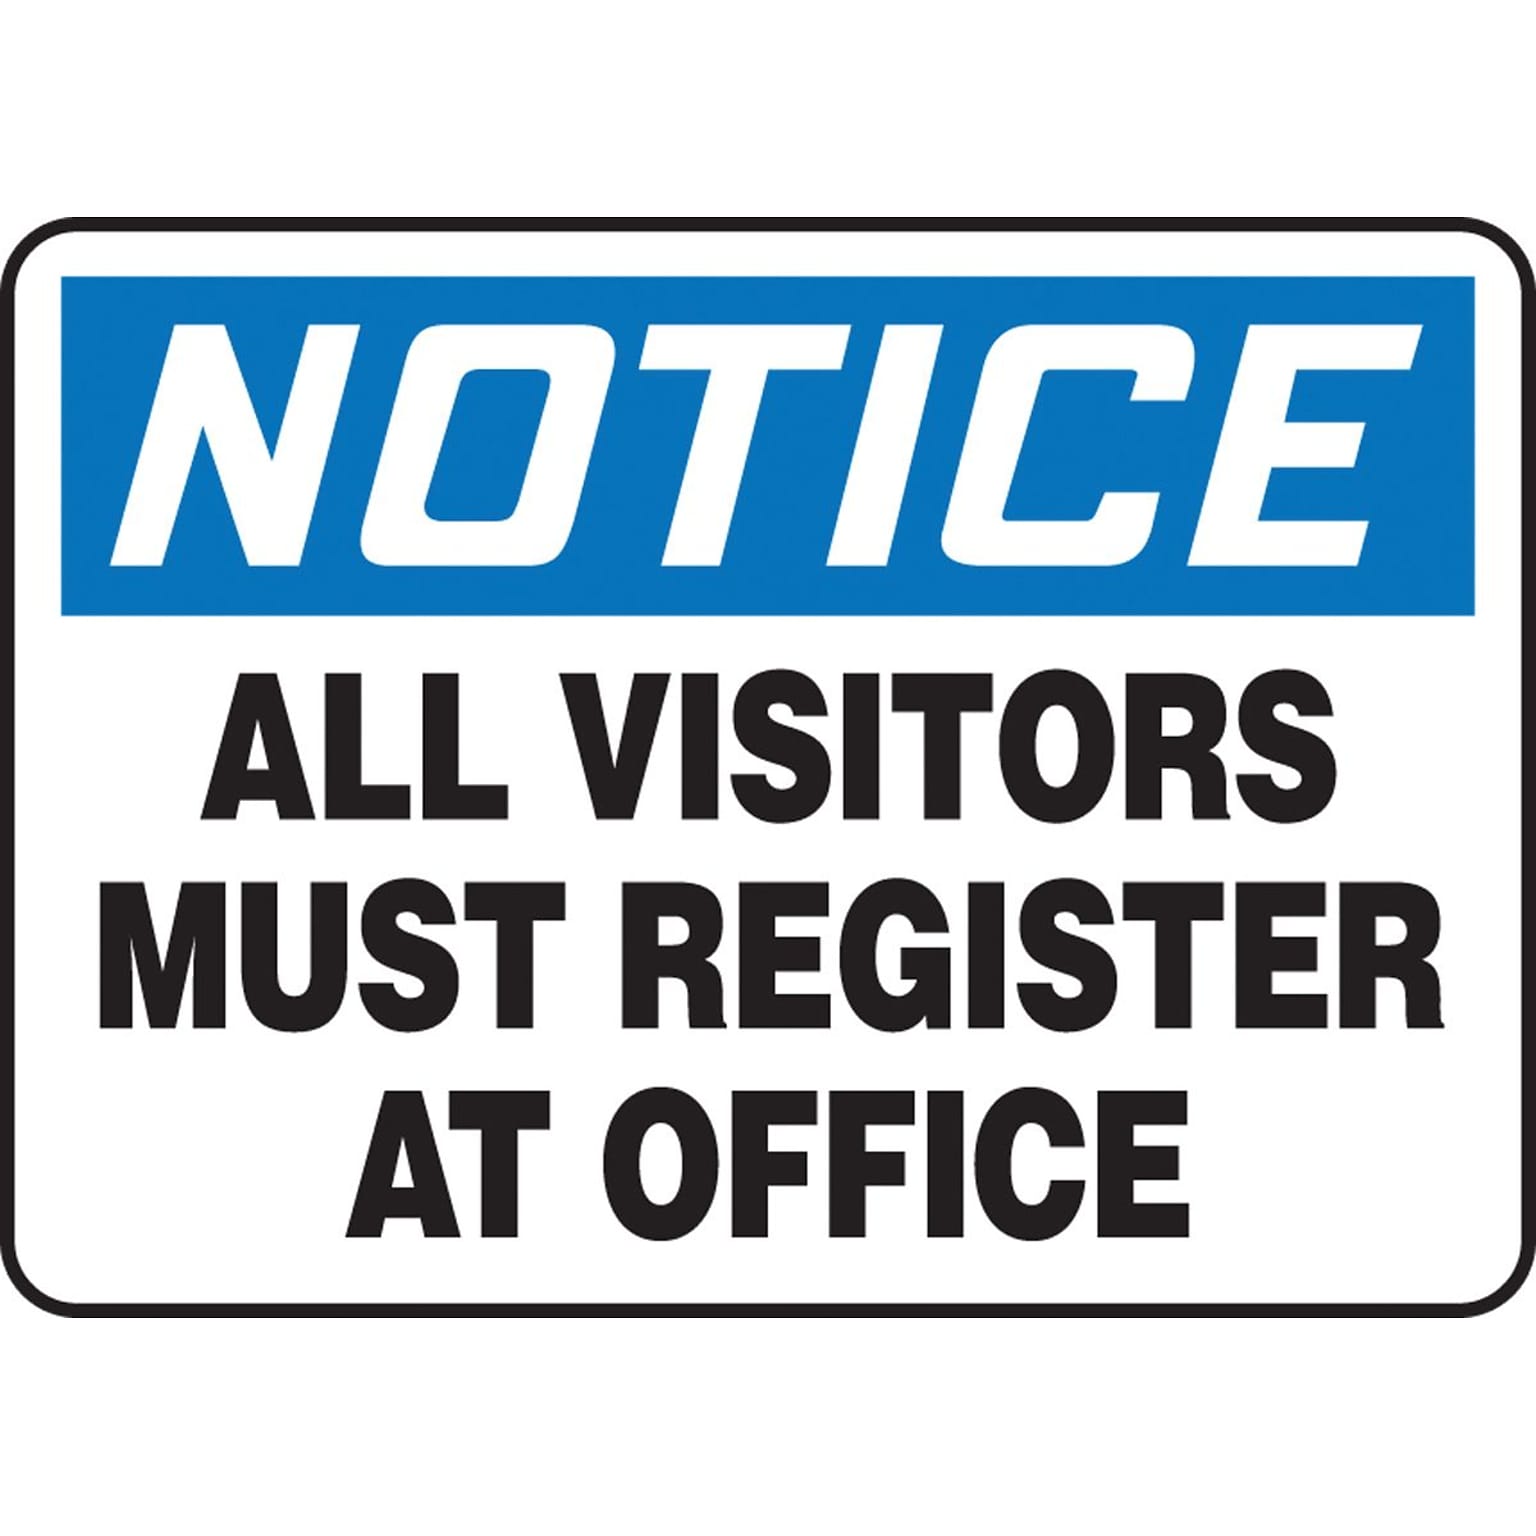 Accuform Signs® 10 x 14 Aluminum Safety Sign NOTICE ALL VISITORS MUST.., Black/Blue On White